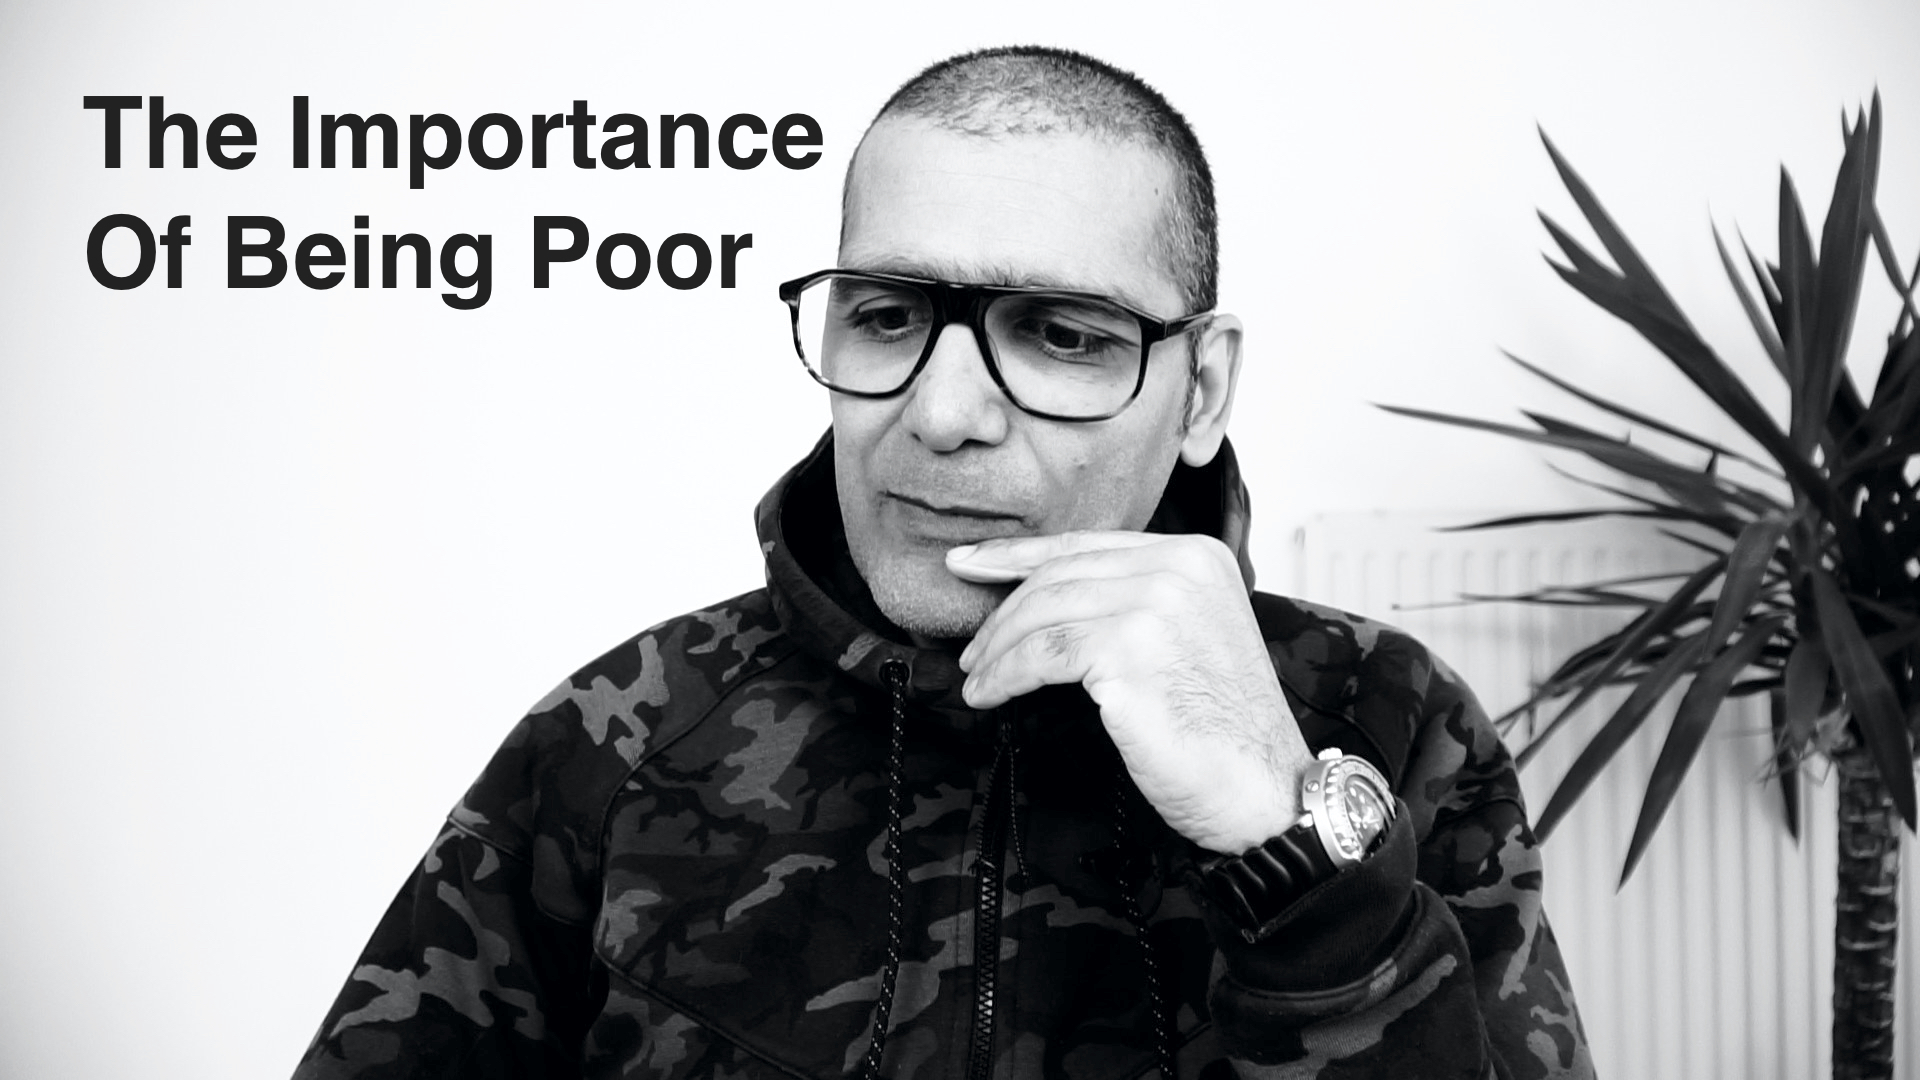 The importance of being poor